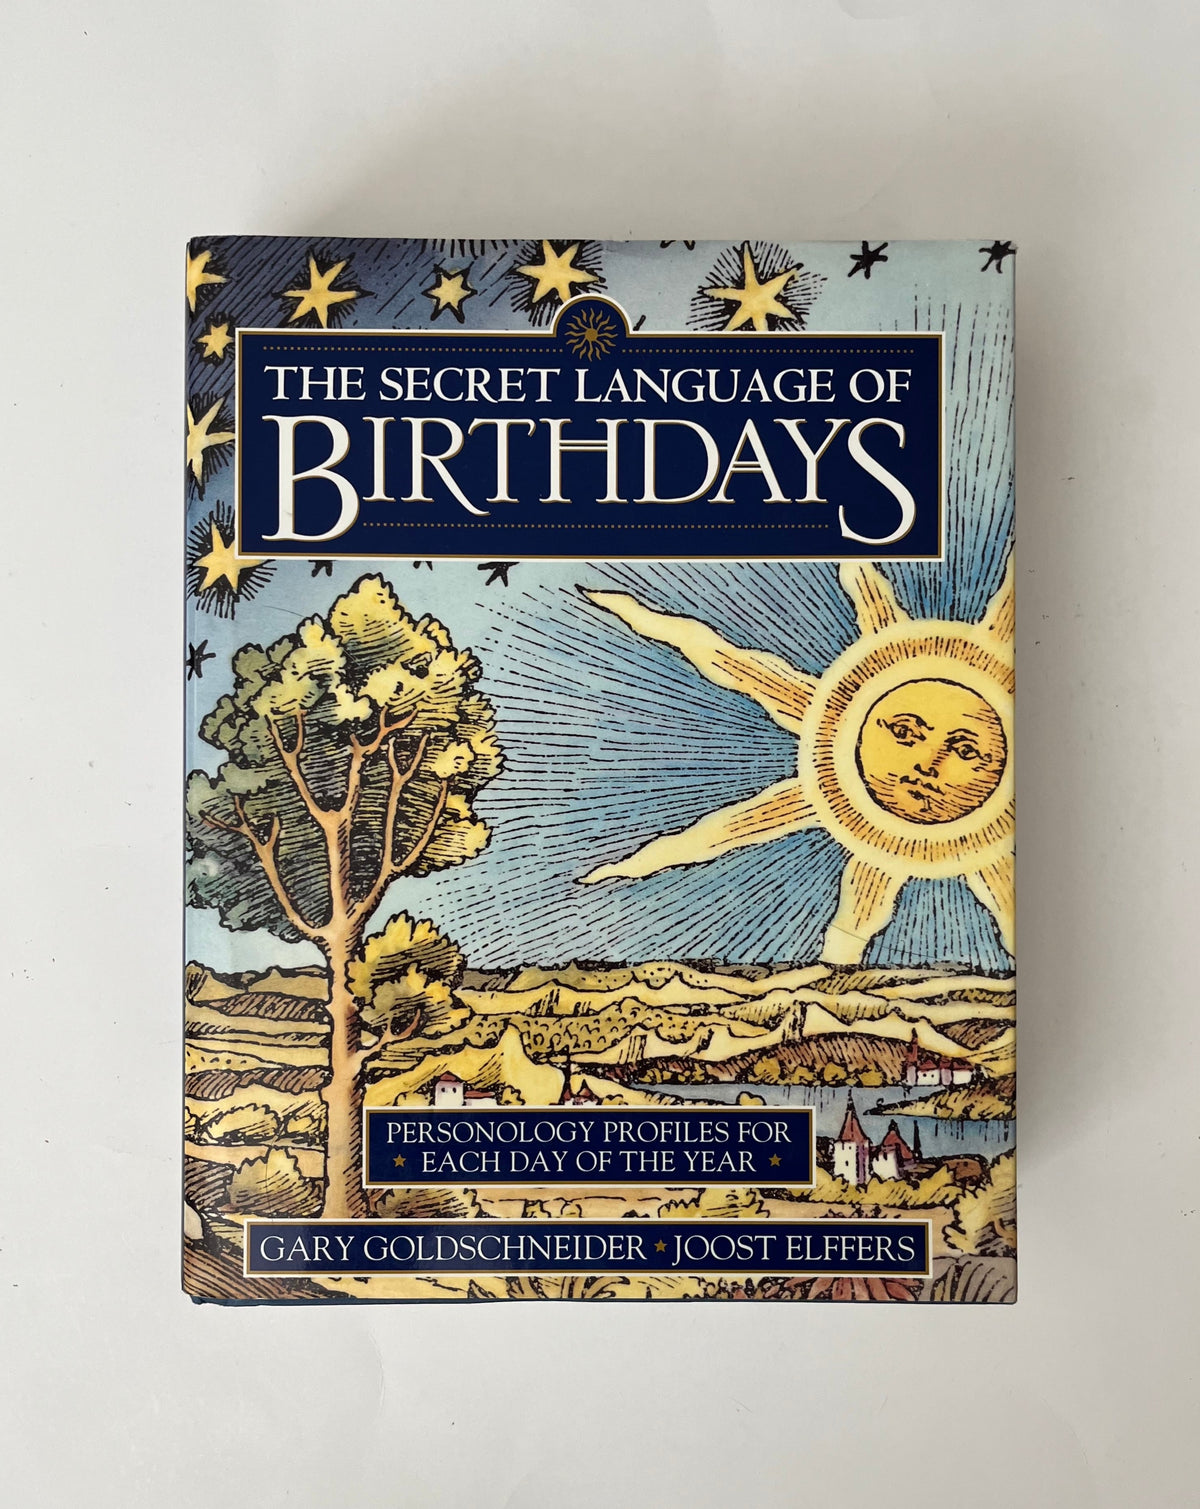 The Secret Language of Birthdays: Personology Profiles for Each Day of the Year by Gary Goldschneider &amp; Joost Elfers